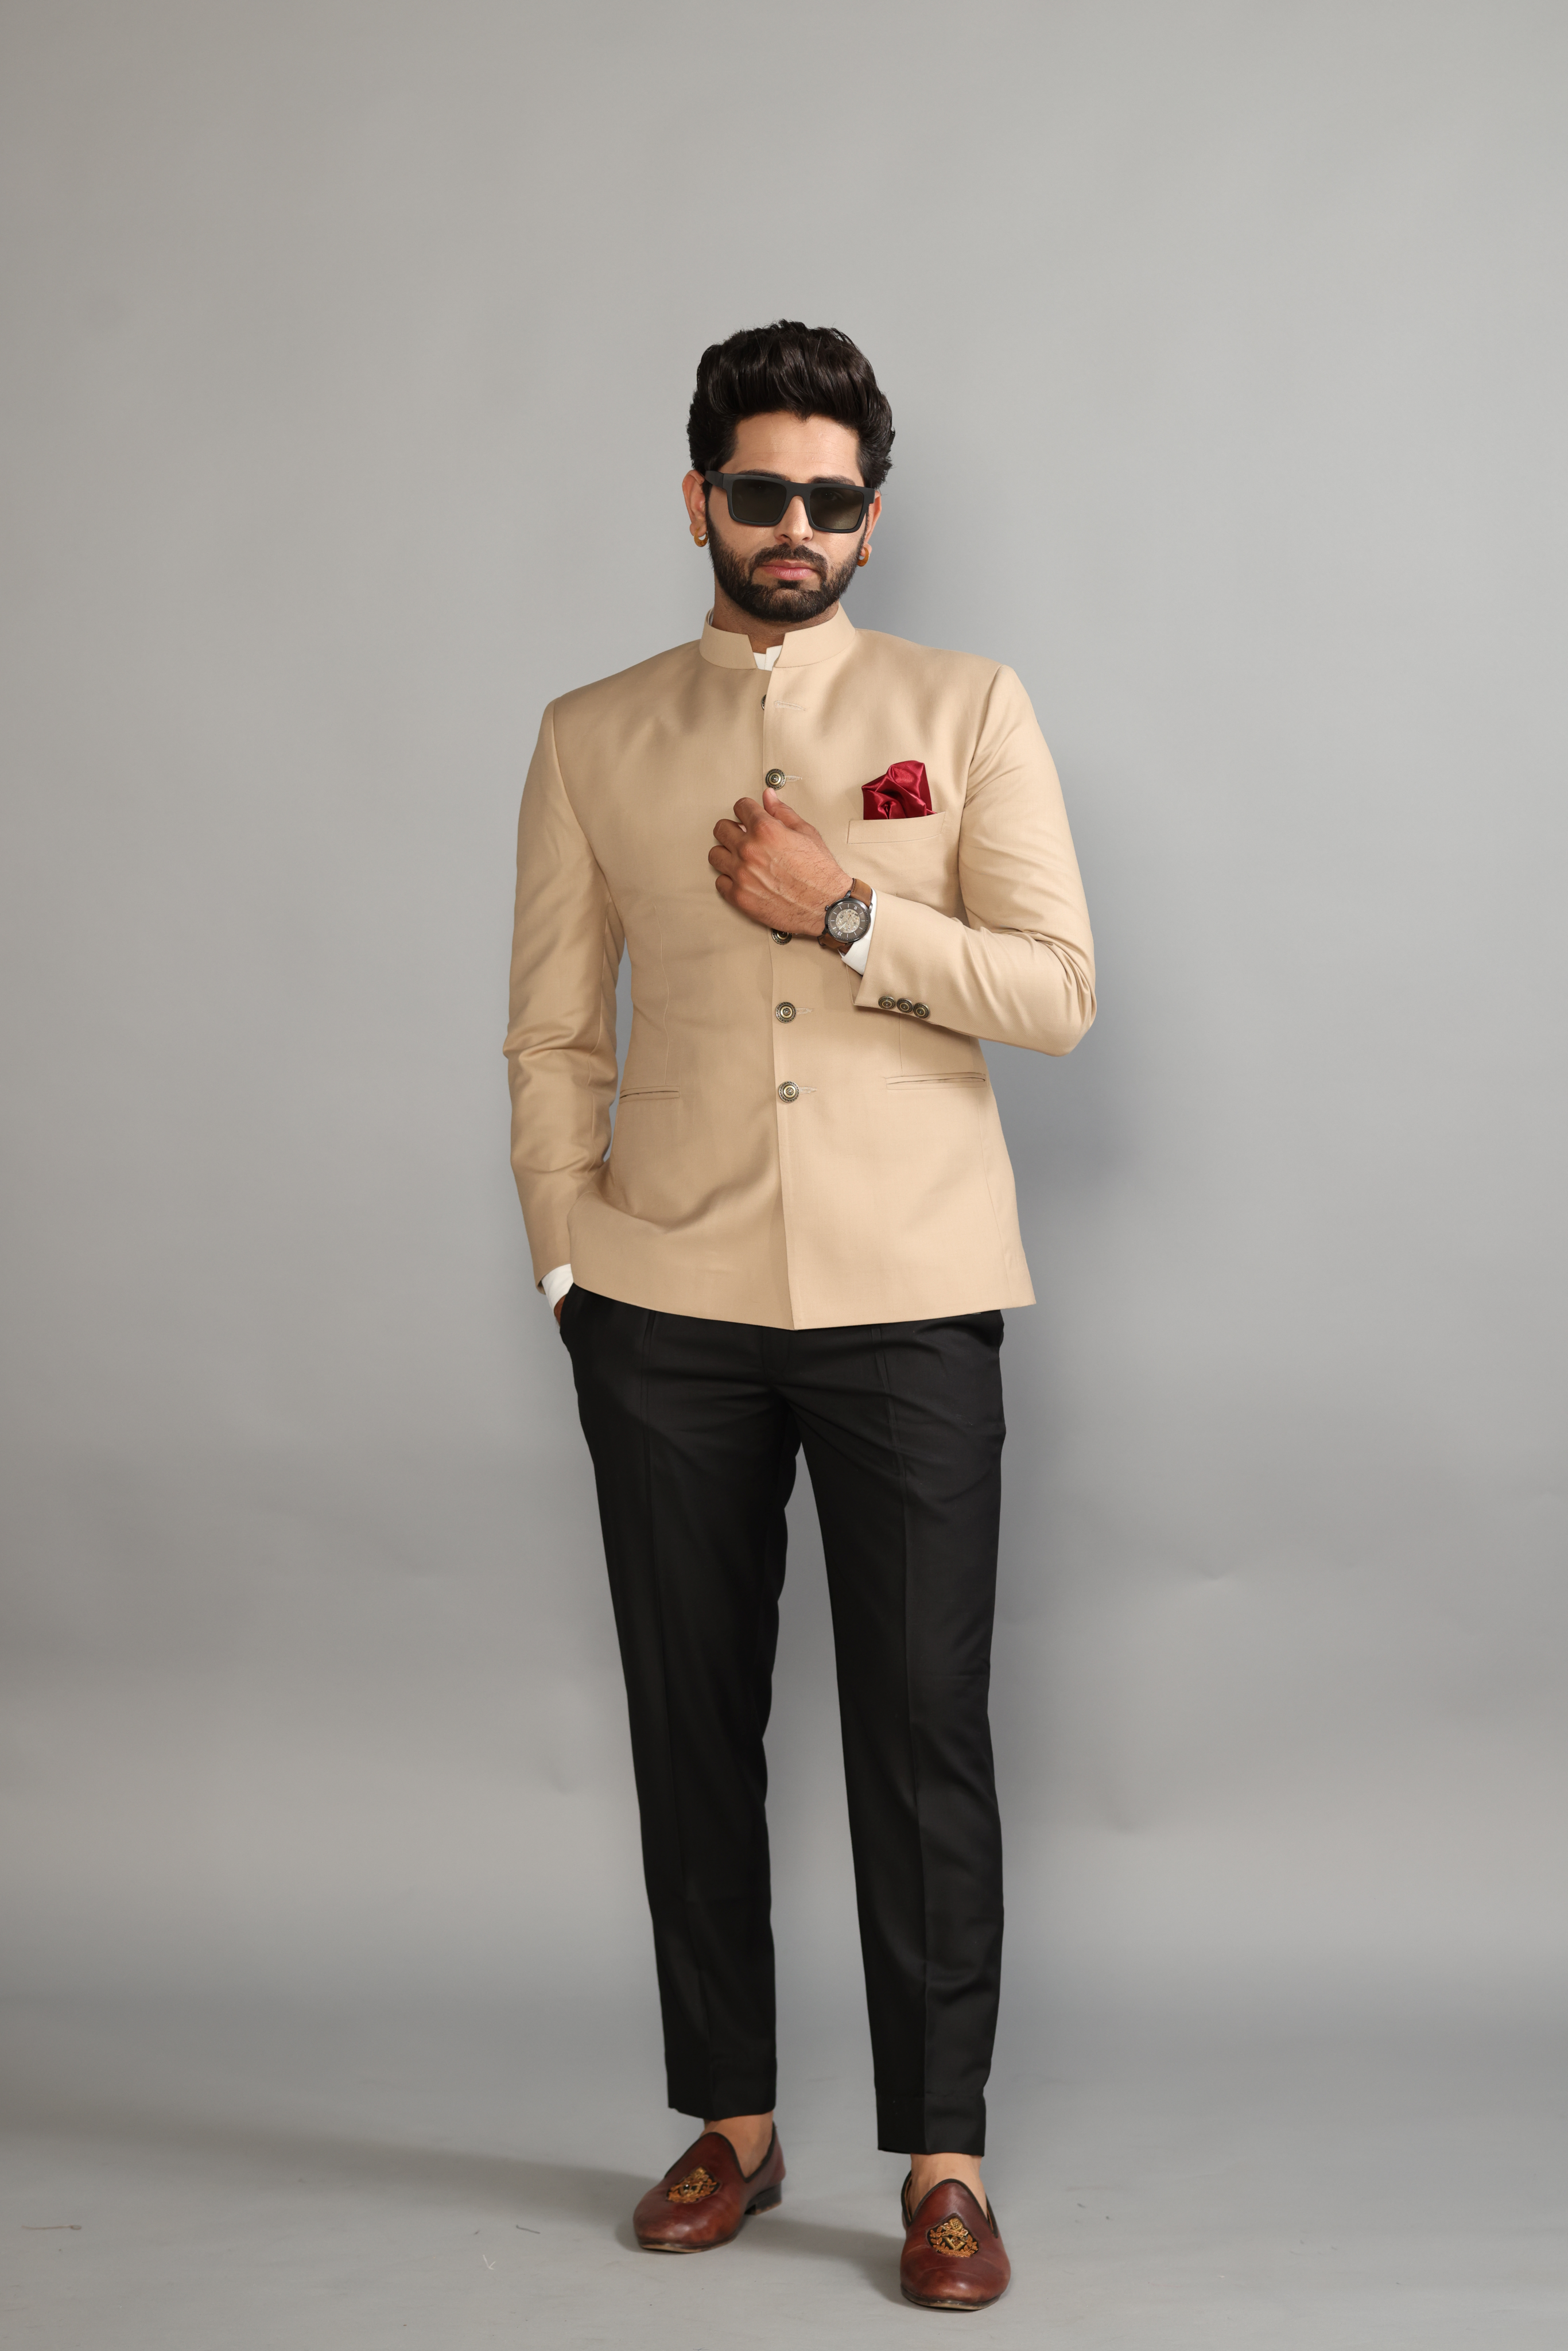 Exclusive Fawn Jodhpuri  Bandhgala  with Black Trouser | Perfect Wedding and Party Wear | Free Personalisation|